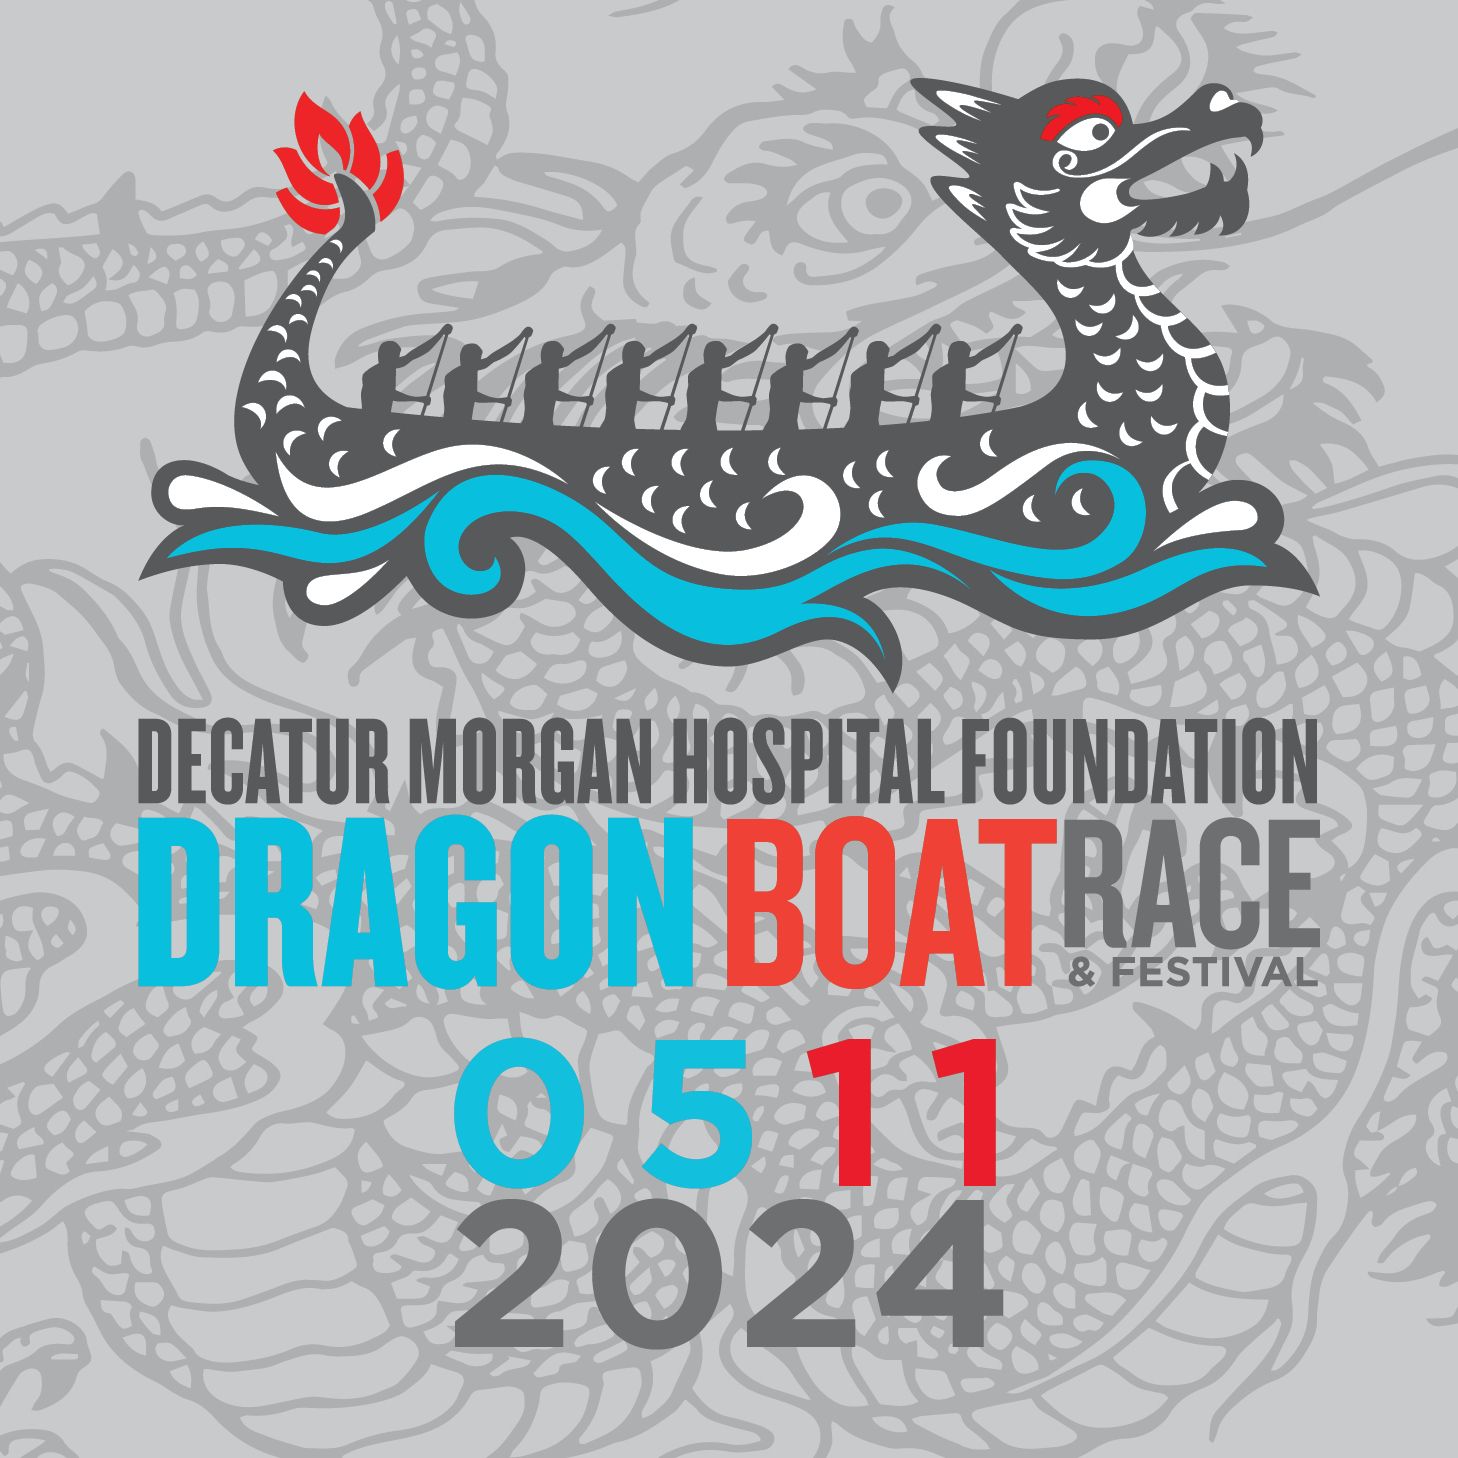 Dragonboat Race and Festival